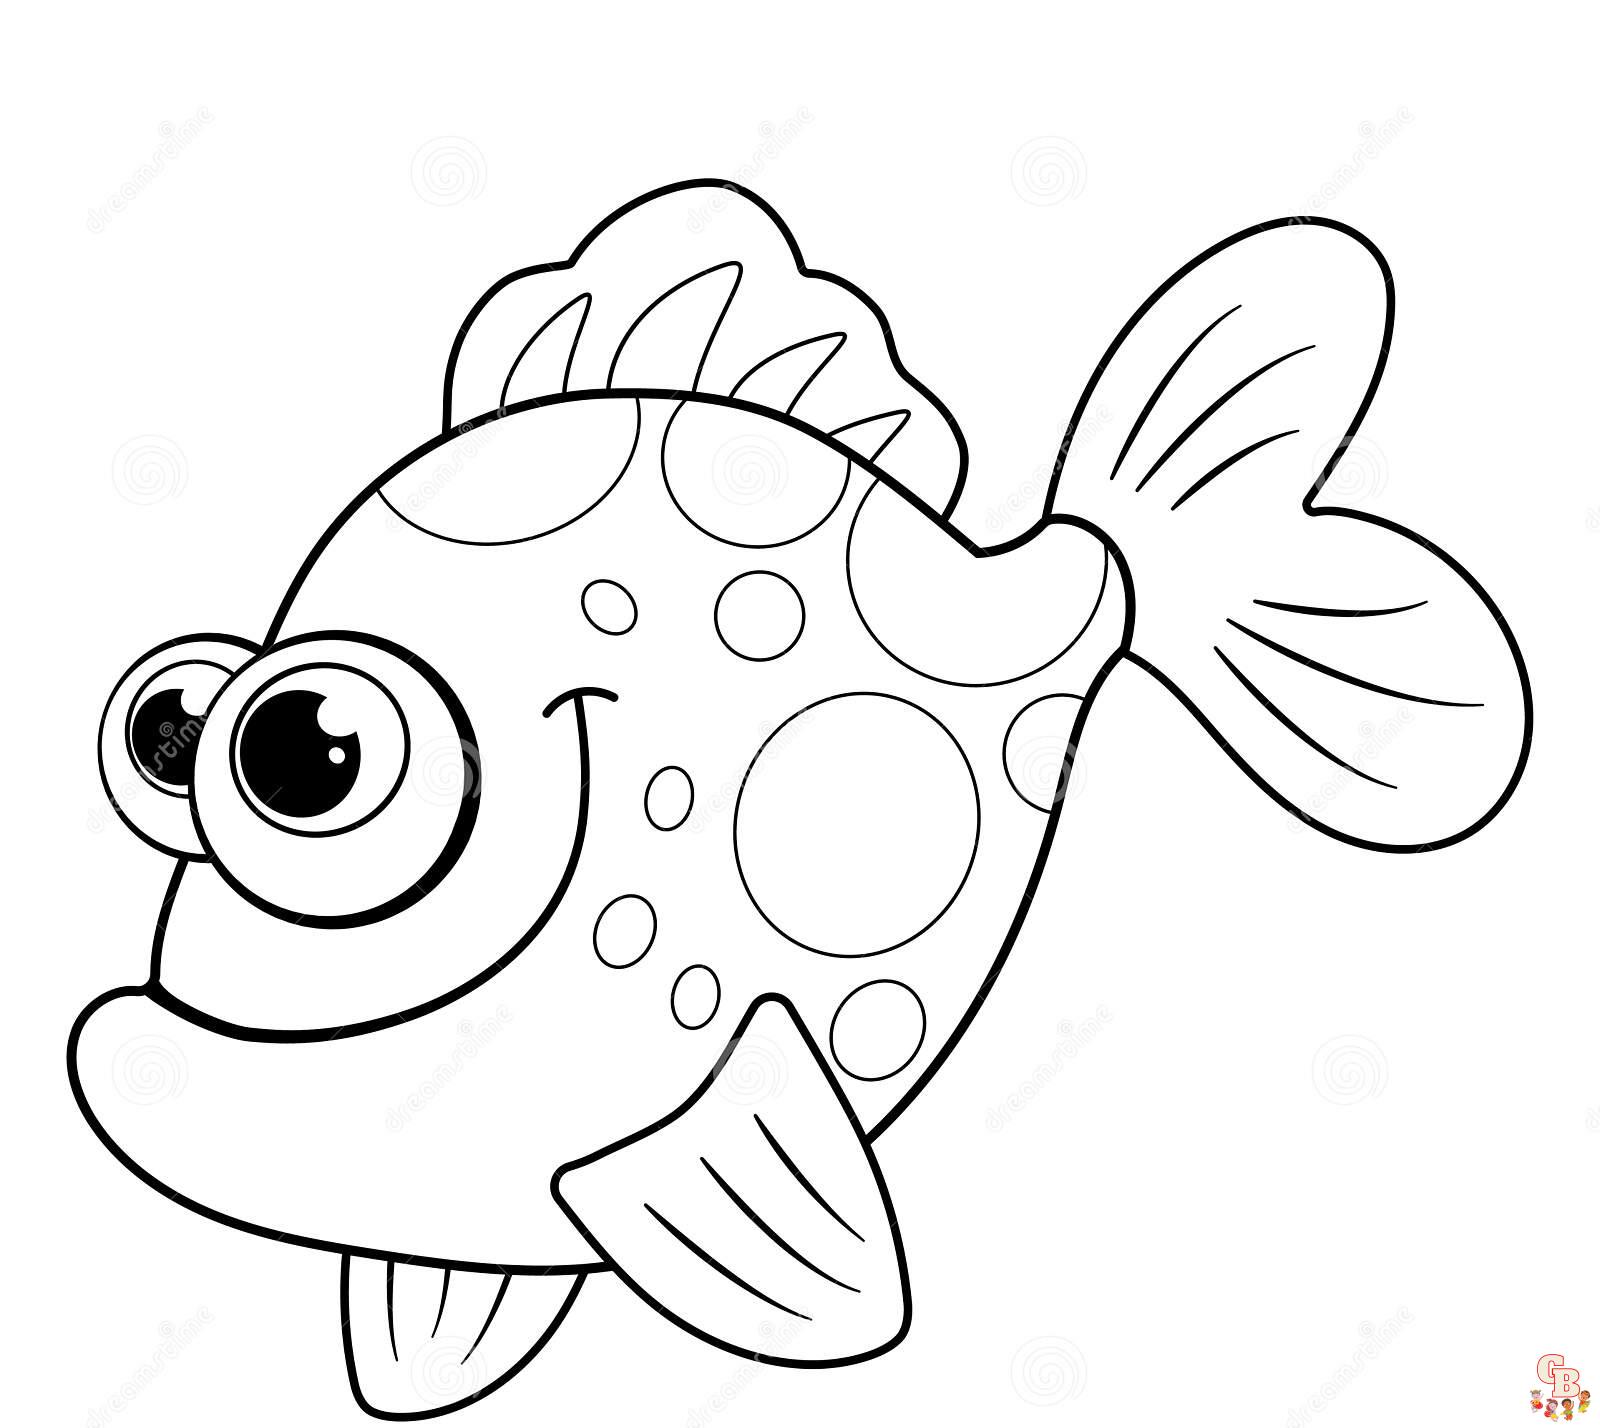 cartoon fish coloring pages